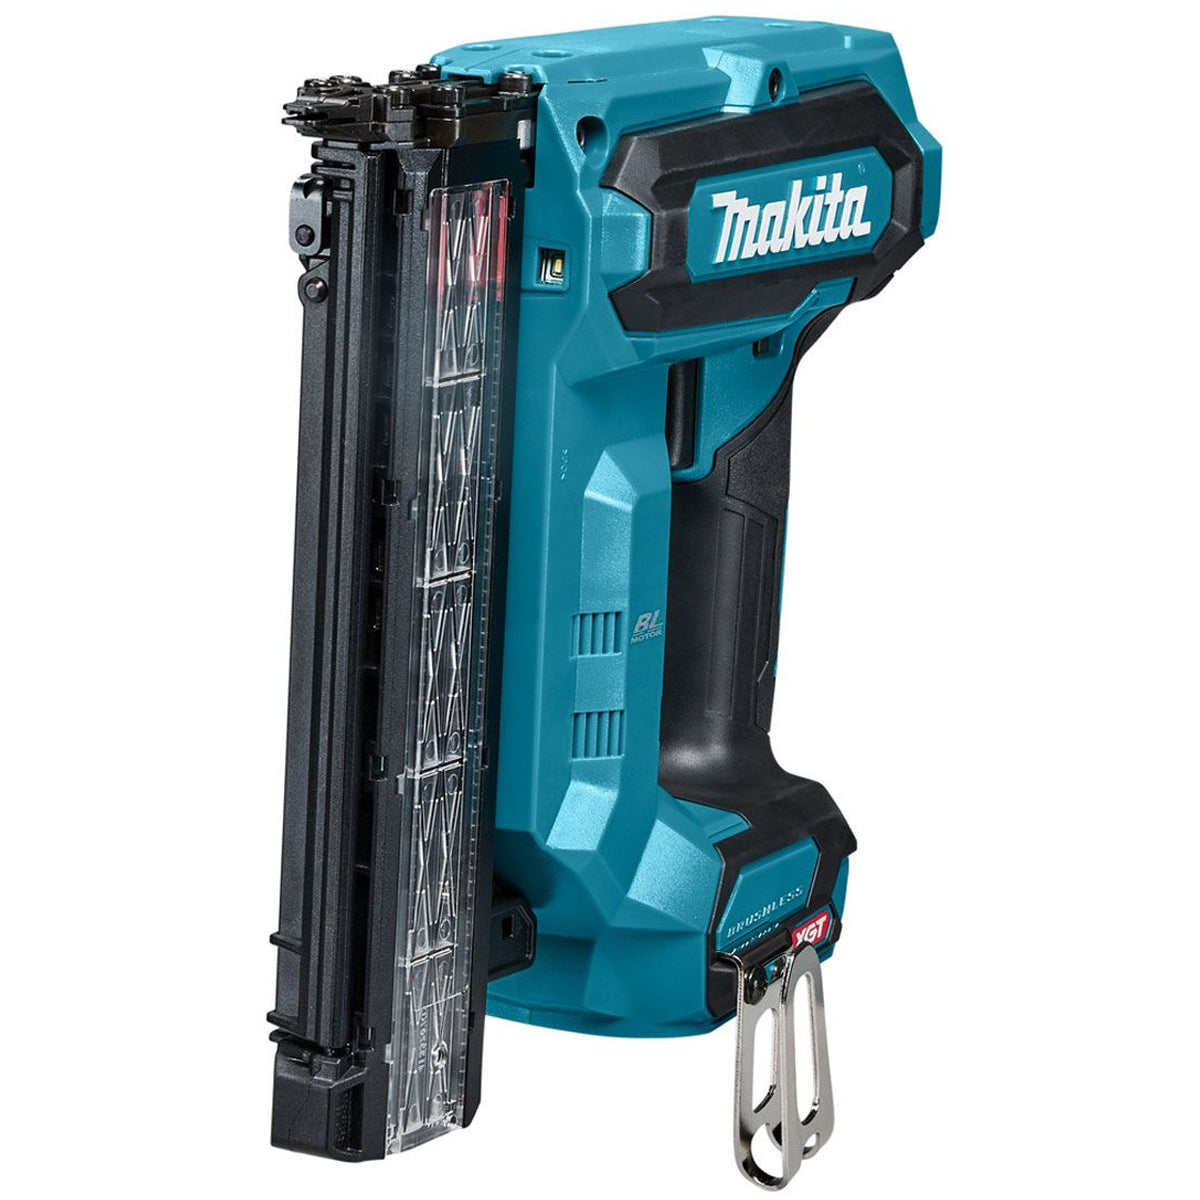 Makita FN001GD202 40V XGT Brushless Second Fix 18Ga Brad Nailer With 2 x 2.5Ah Battery Charger